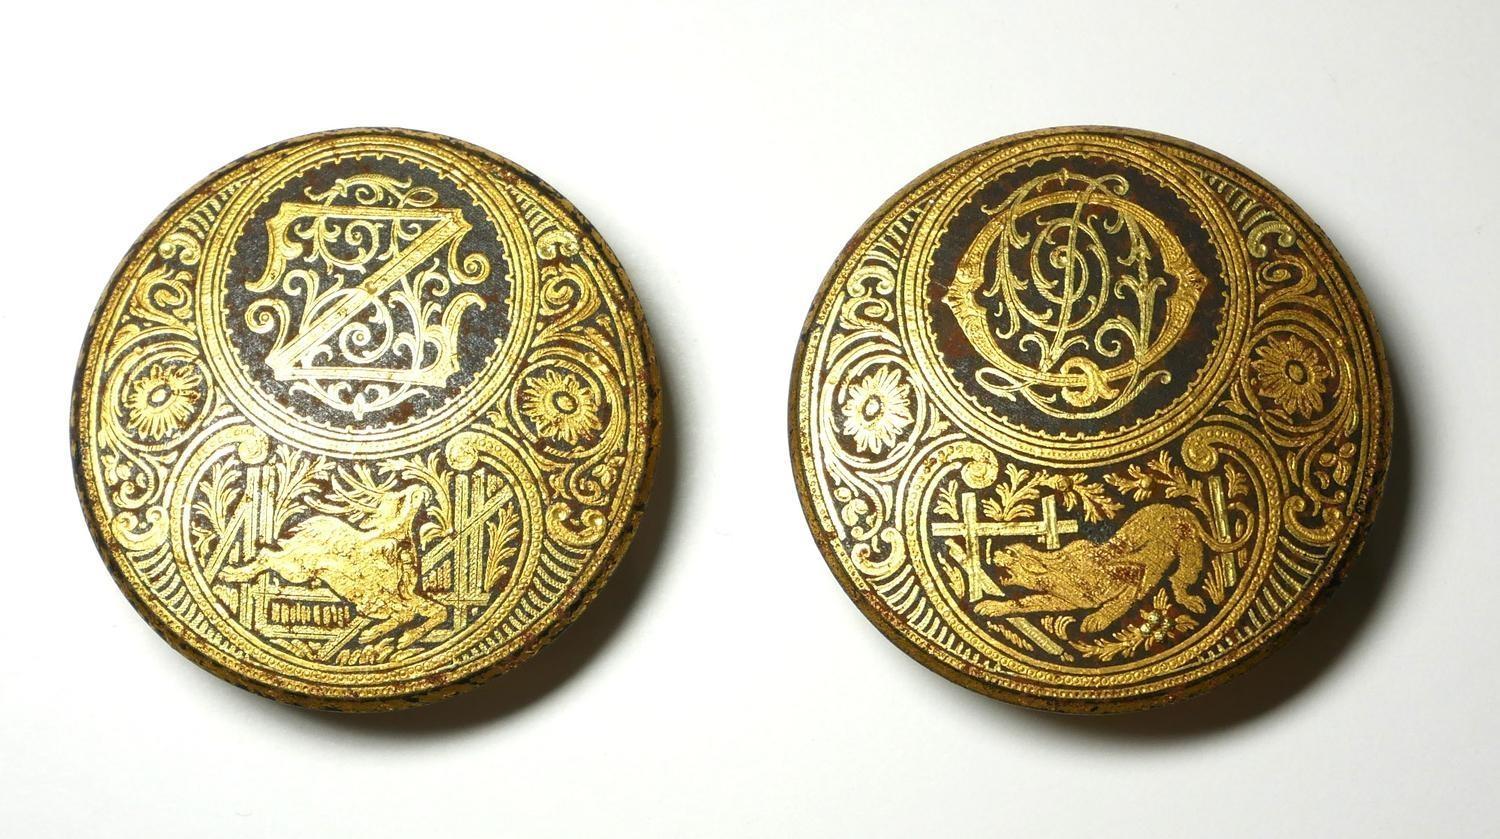 A PAIR OF 20TH CENTURY SPANISH GILT METAL DAMASCENE CIRCULAR DRESS BUTTONS With fine gilt decoration